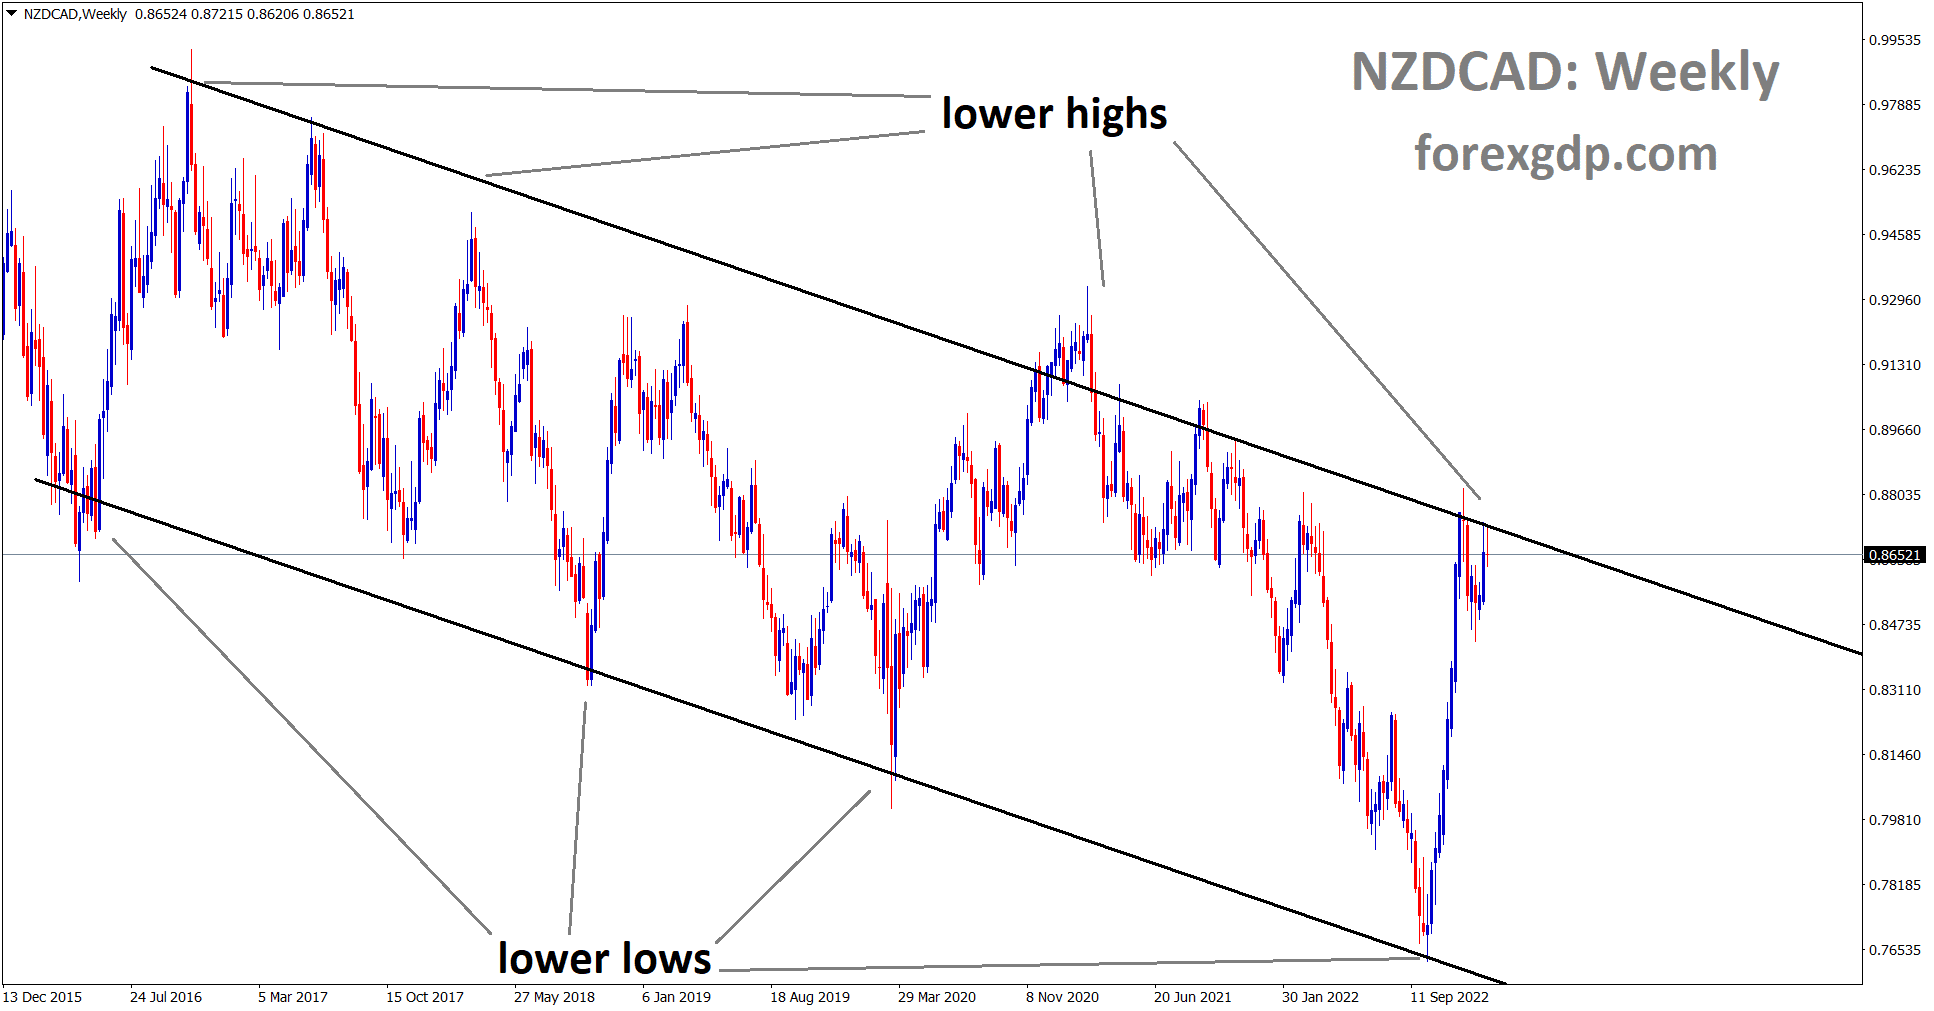 NZDCAD is moving in a Descending channel and the market has reached the lower high area of the channel.